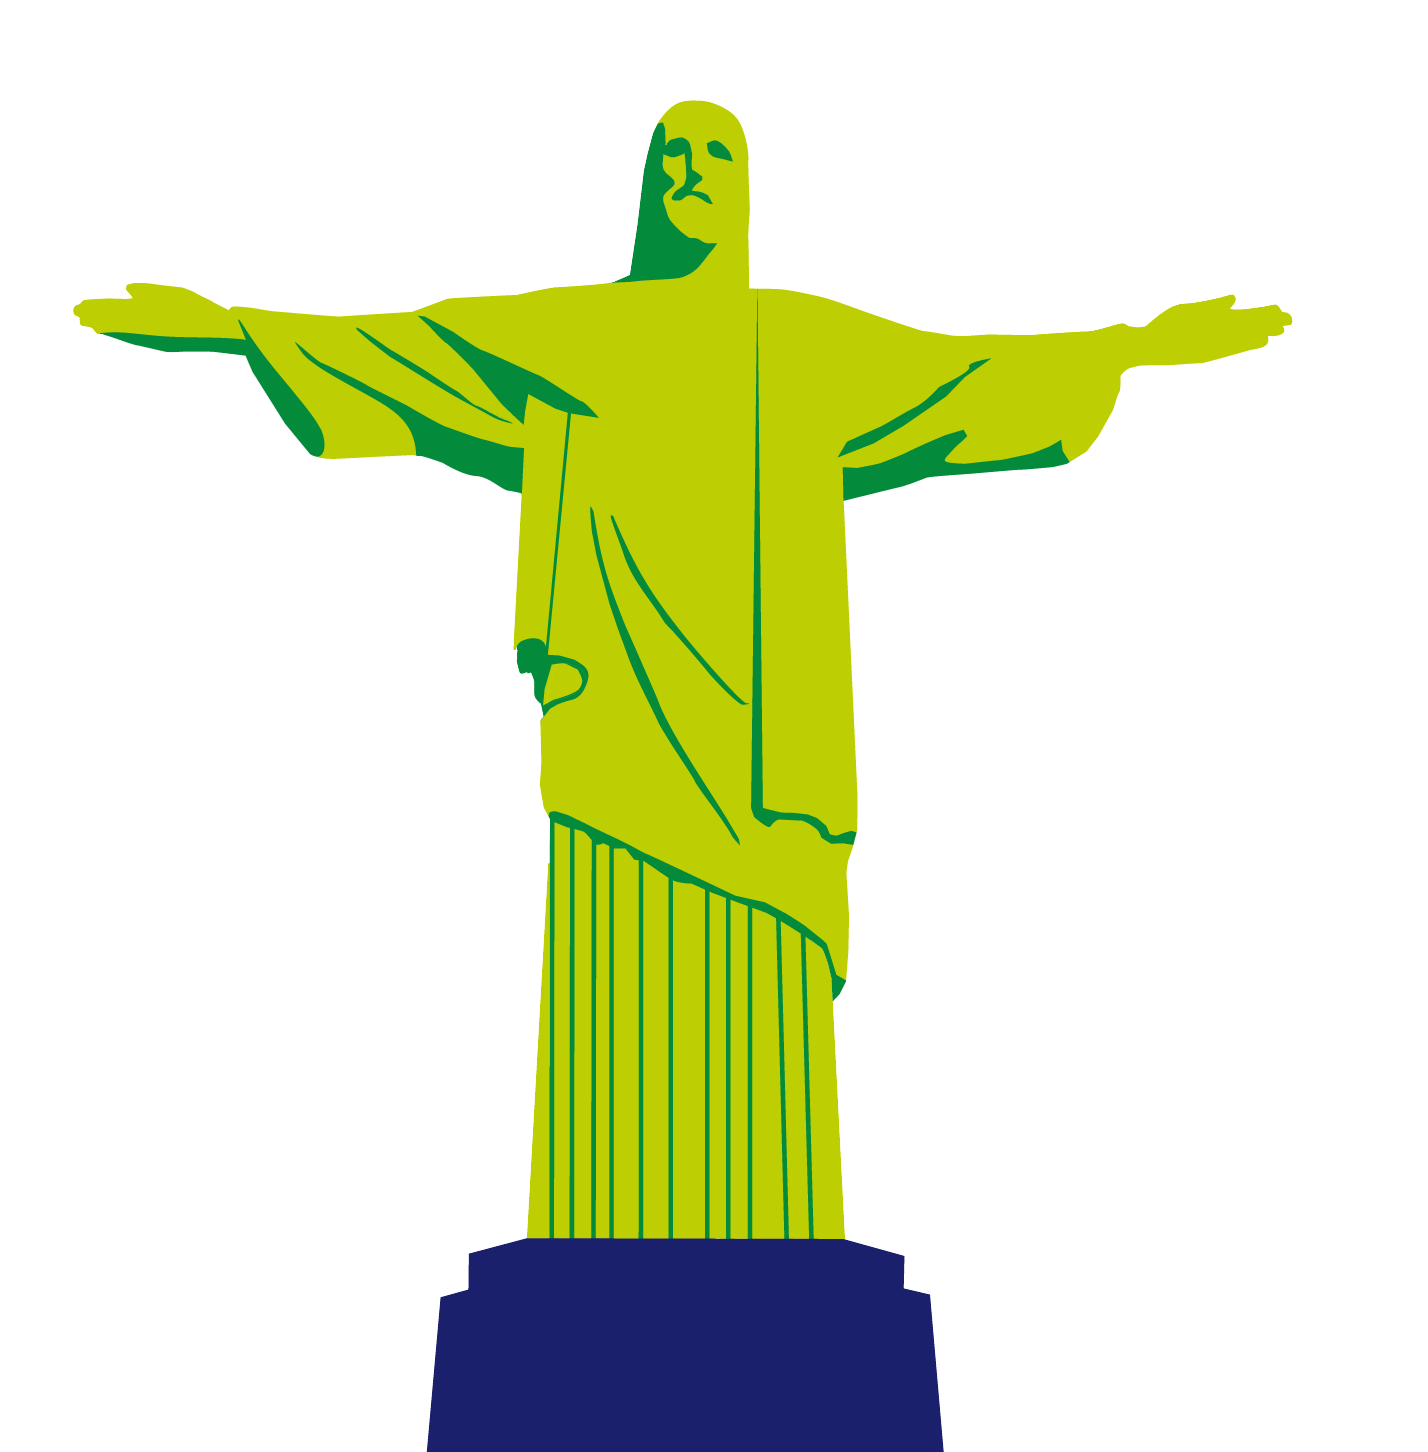 King Christ Corcovado Redeemer Brazil, The Jesus PNG Image